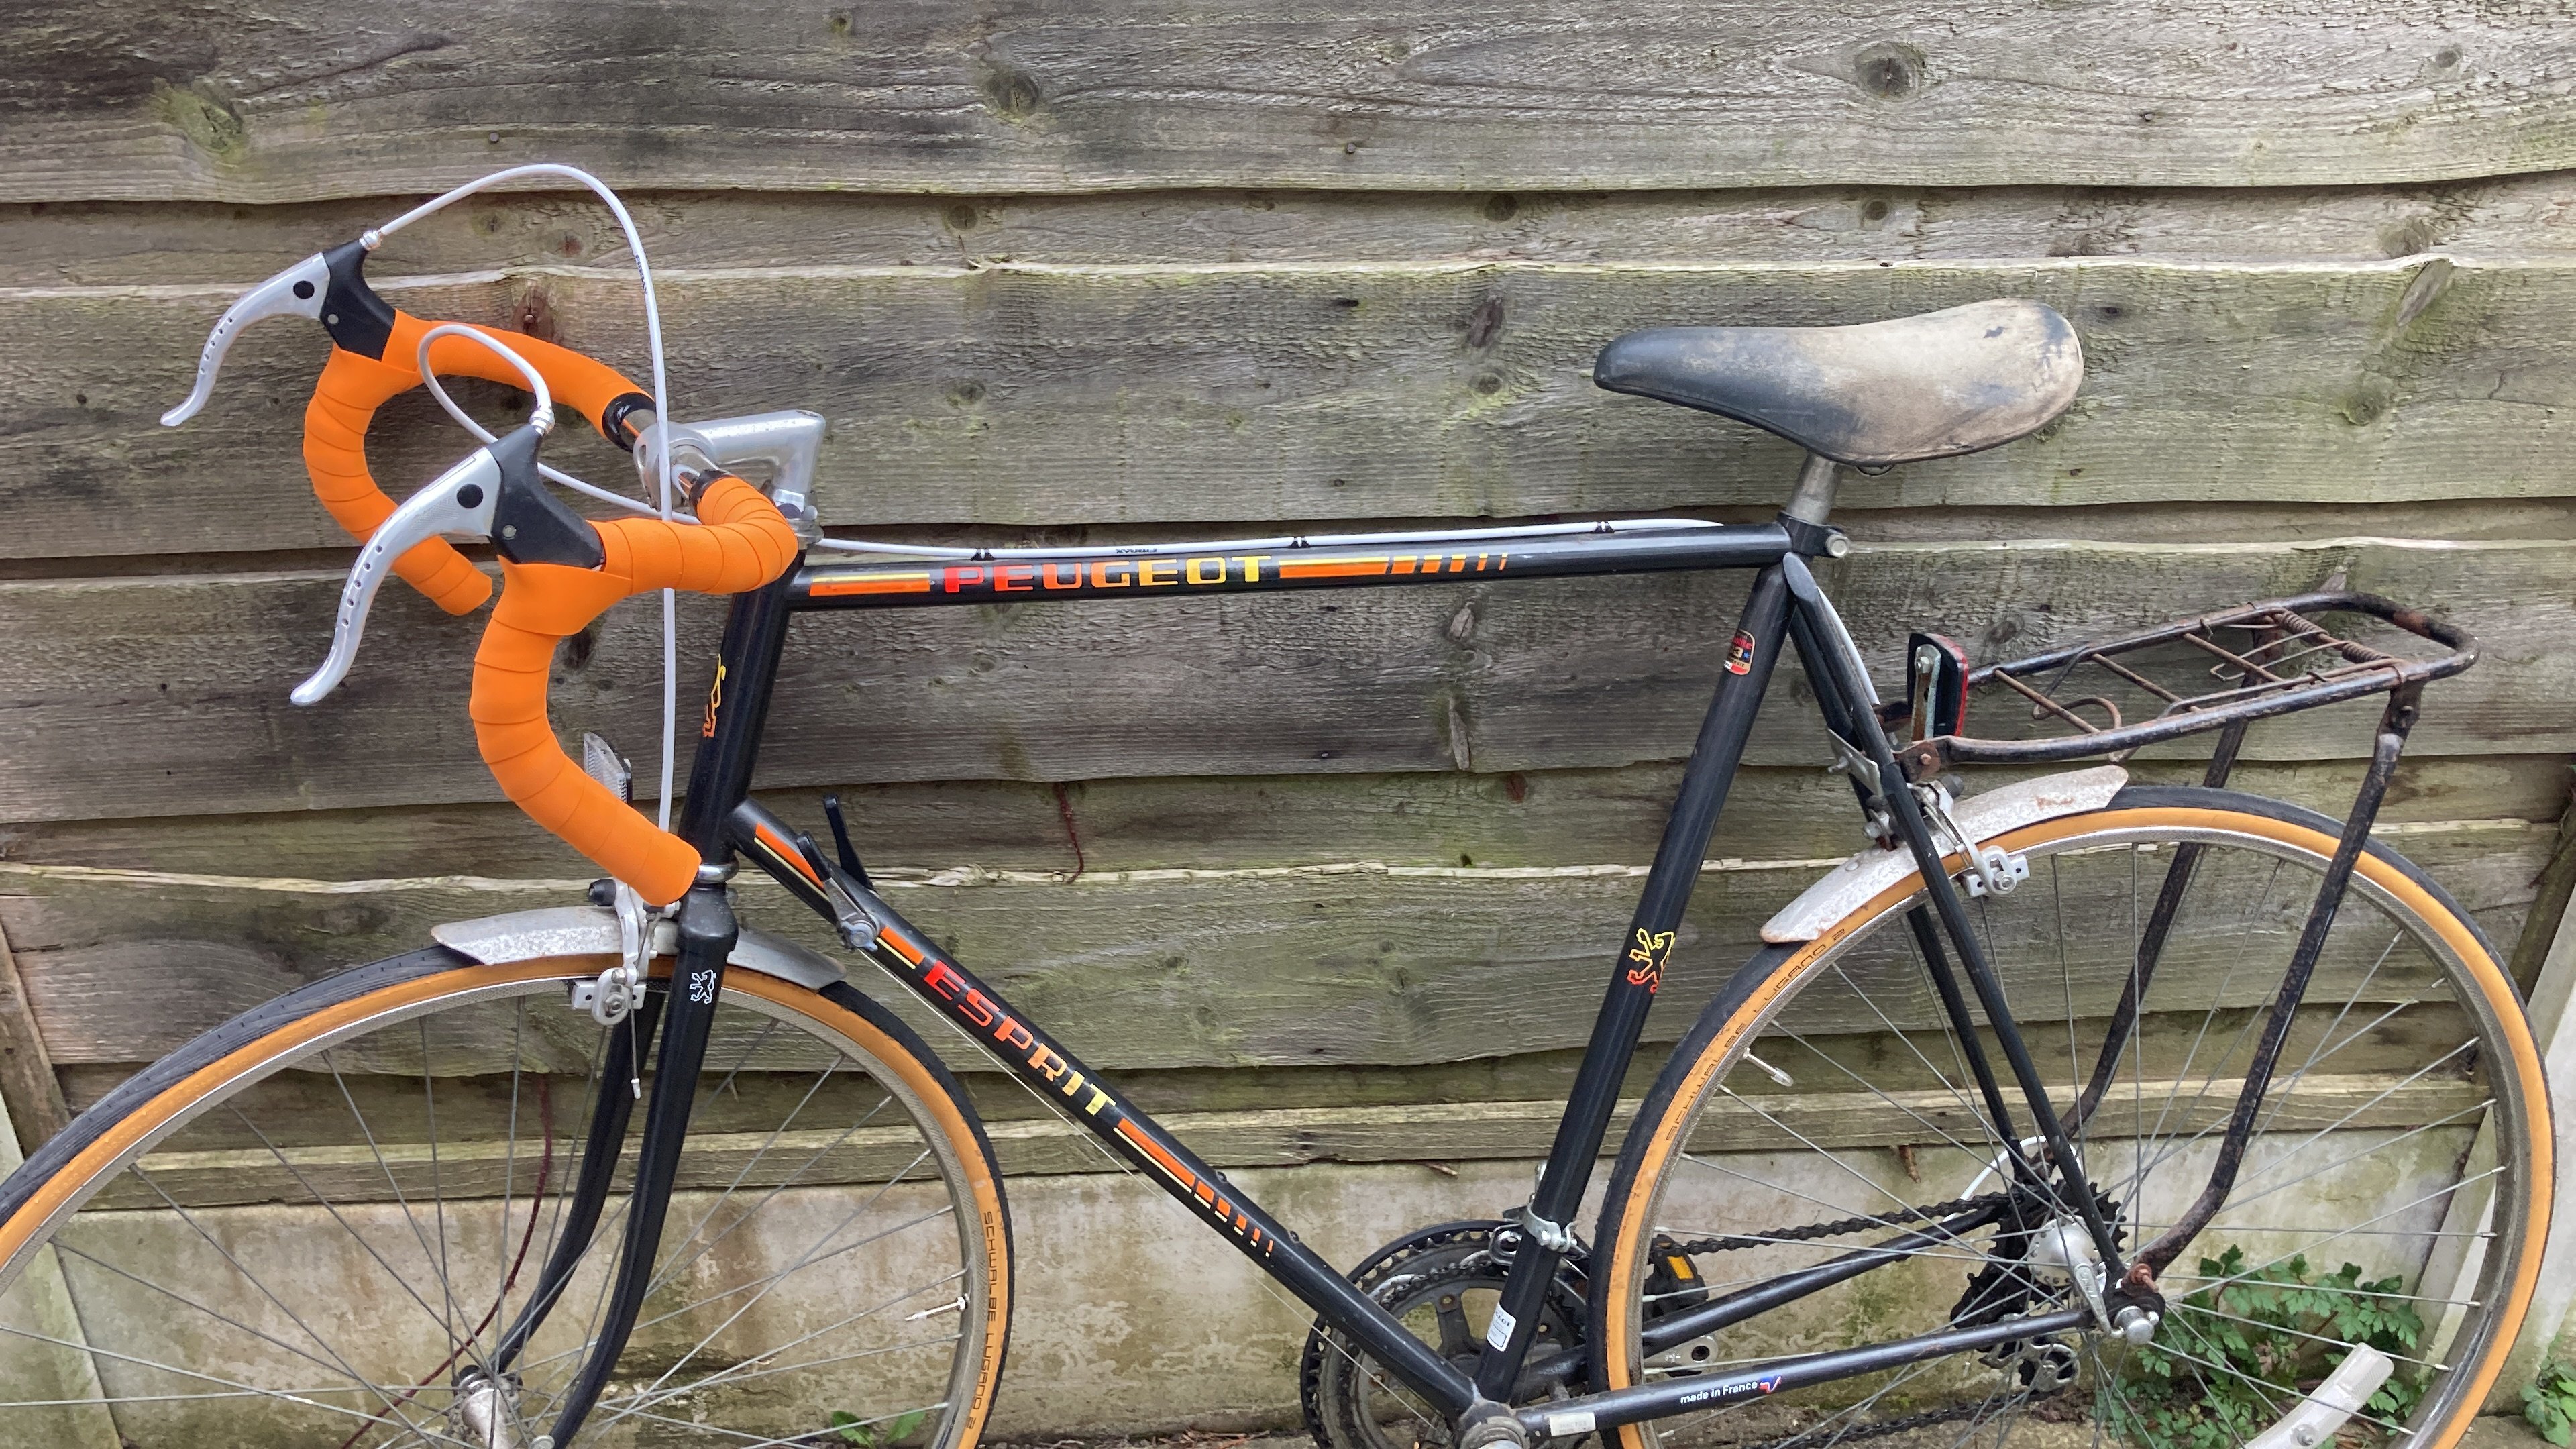 A vintage Peugeot bike  leaning against a fence. It has orange handlebars, and a black frame, with extremely-80's red-yellow gradient text on the frame.